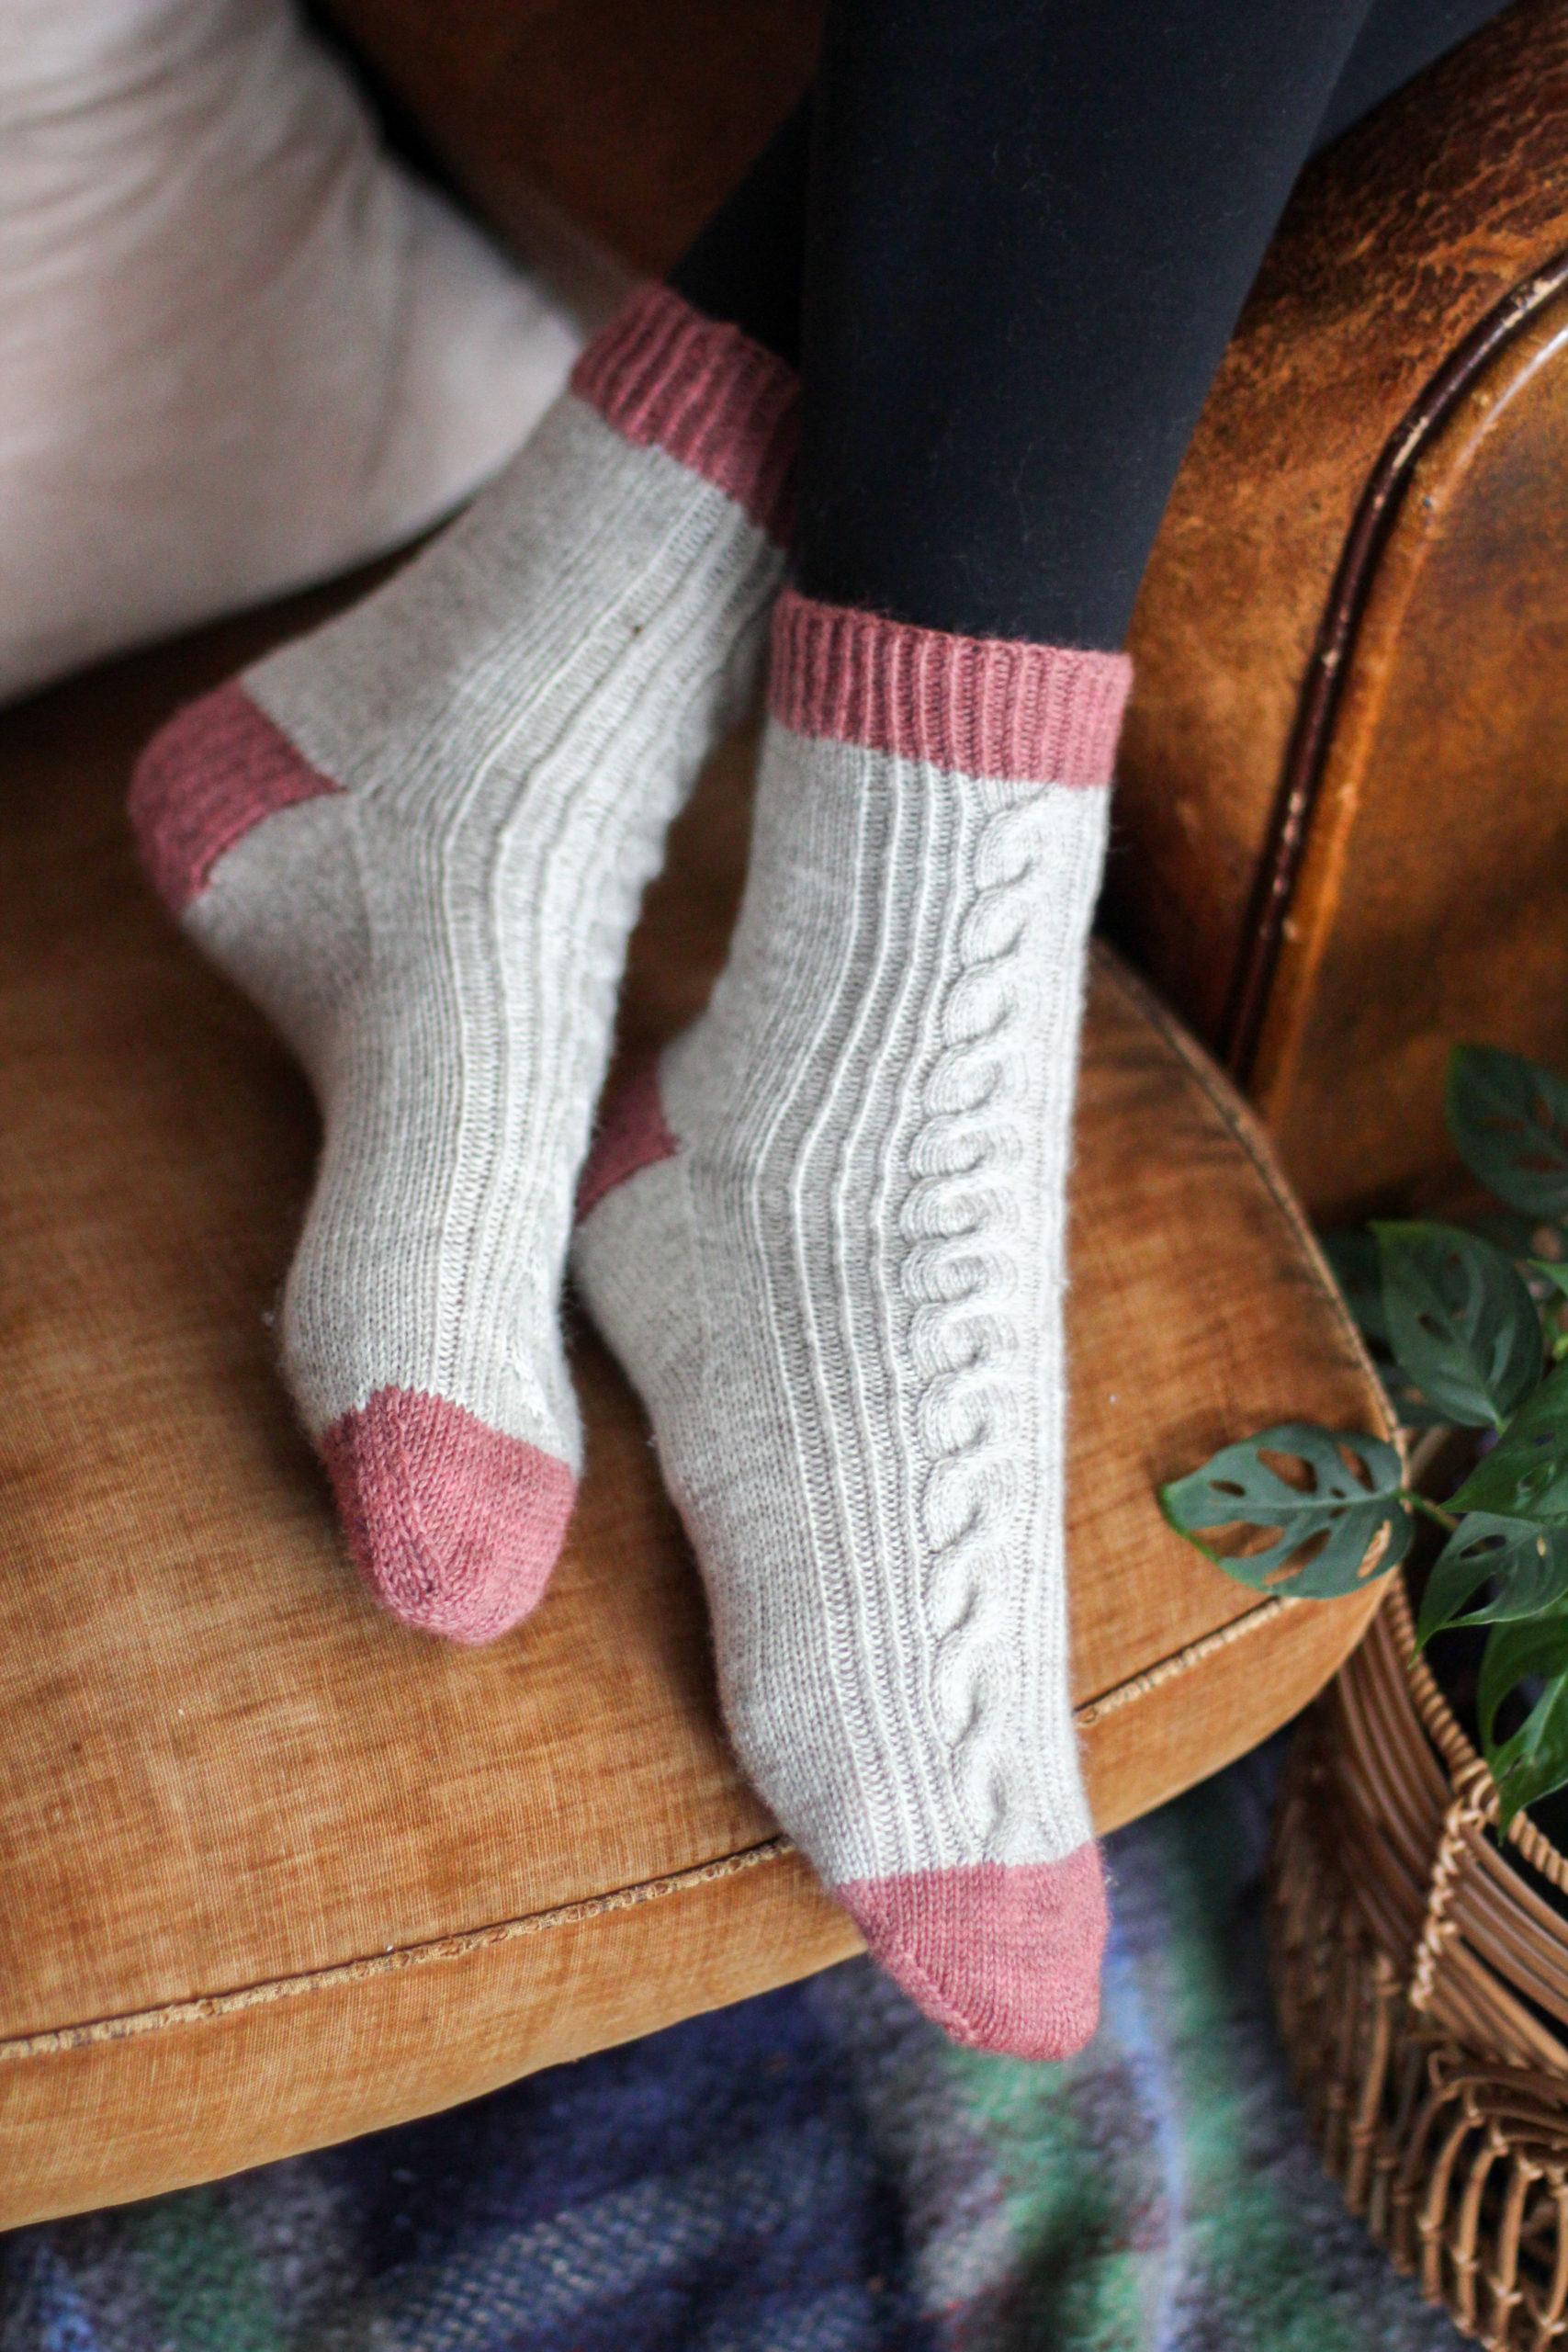 the Cheering Socks, knit in white with pink contrast cuff, heel and toes. Knitting Pattern by Helen Stewart of Curious Handmade